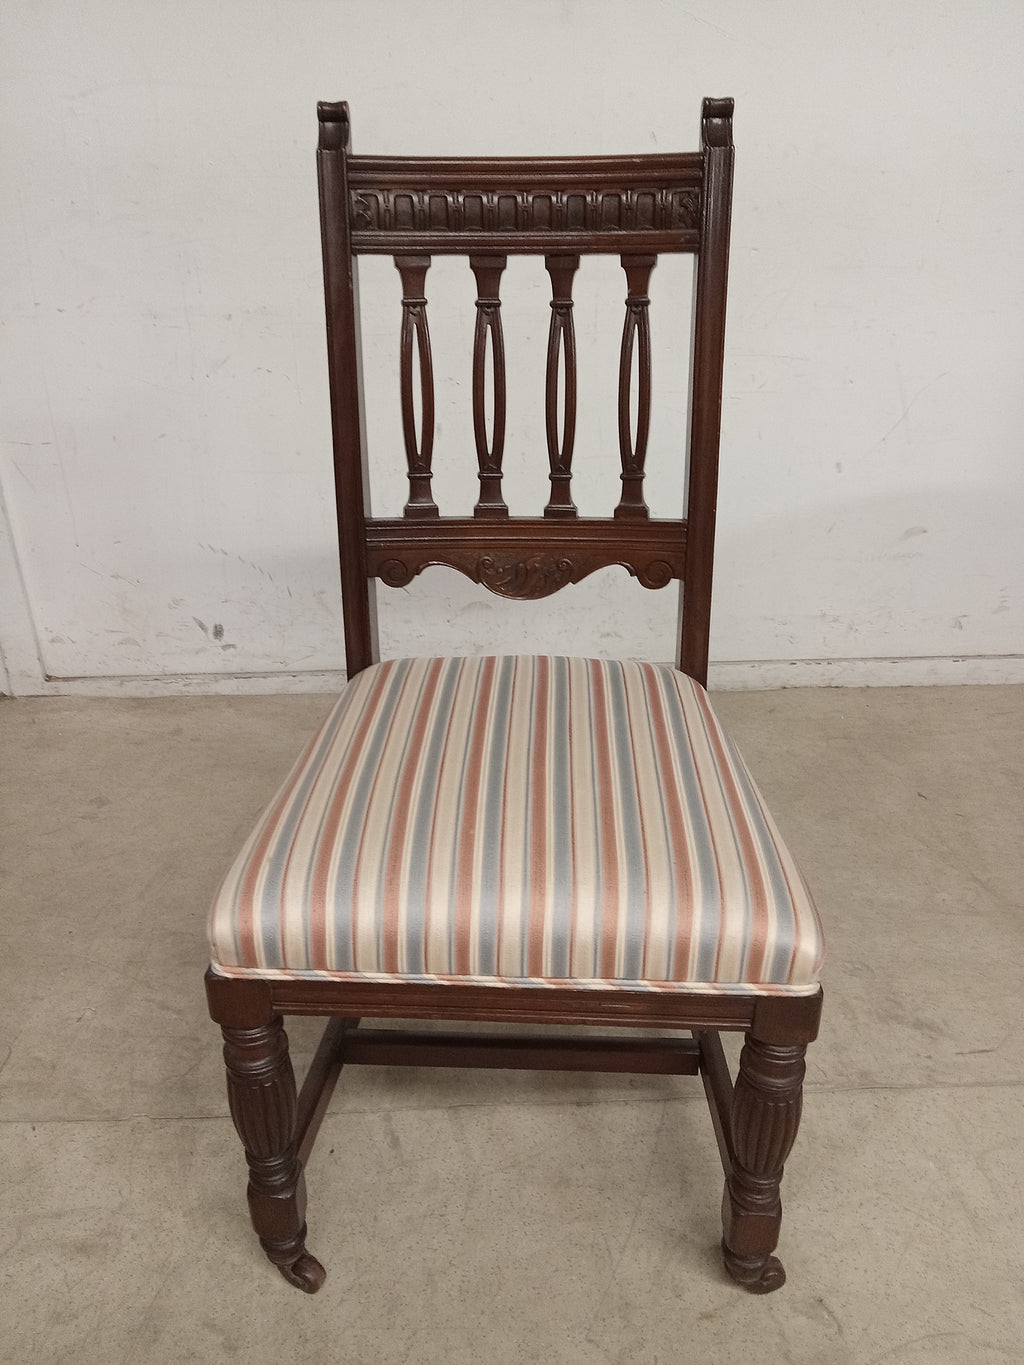 Set of 4 Antique Wooden Chairs